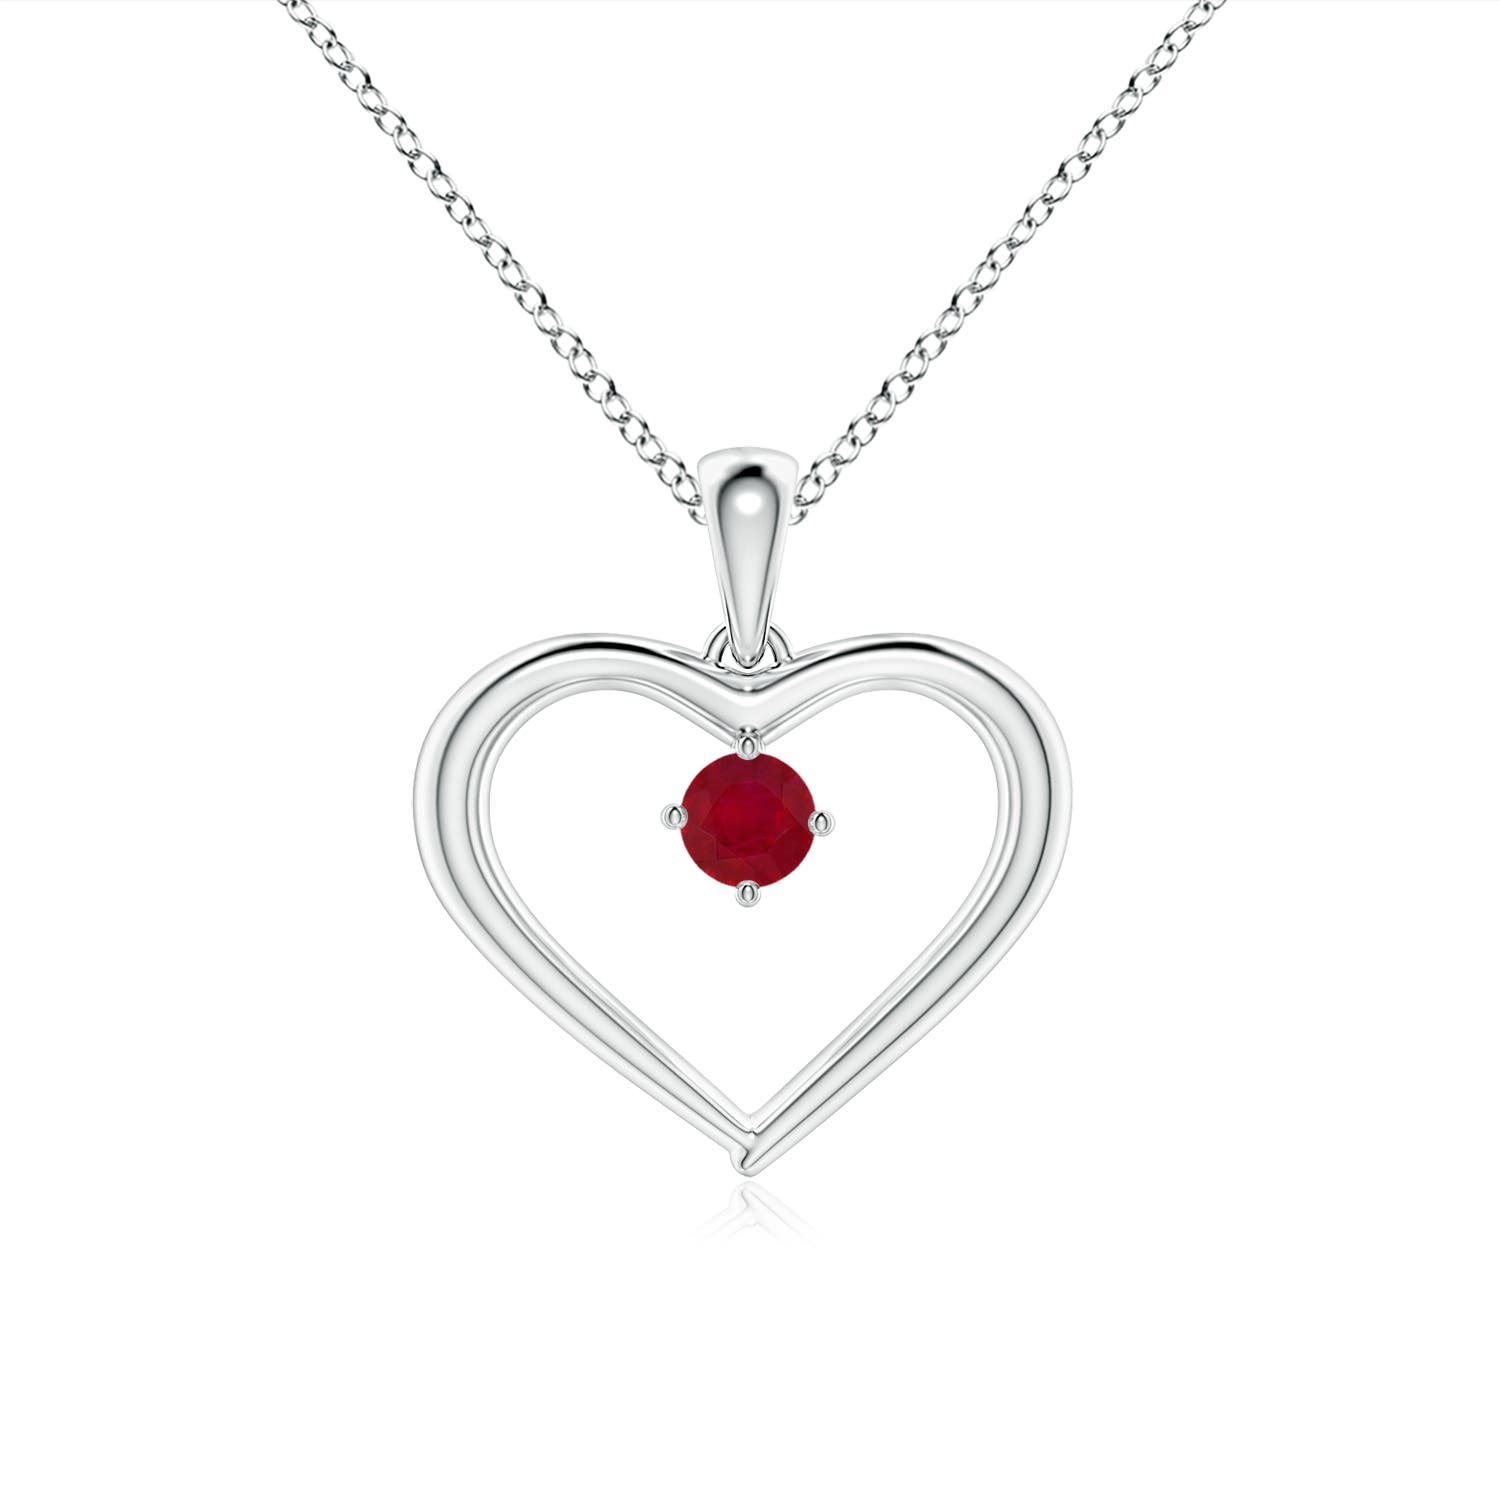 AA - Ruby / 0.15 CT / 14 KT White Gold